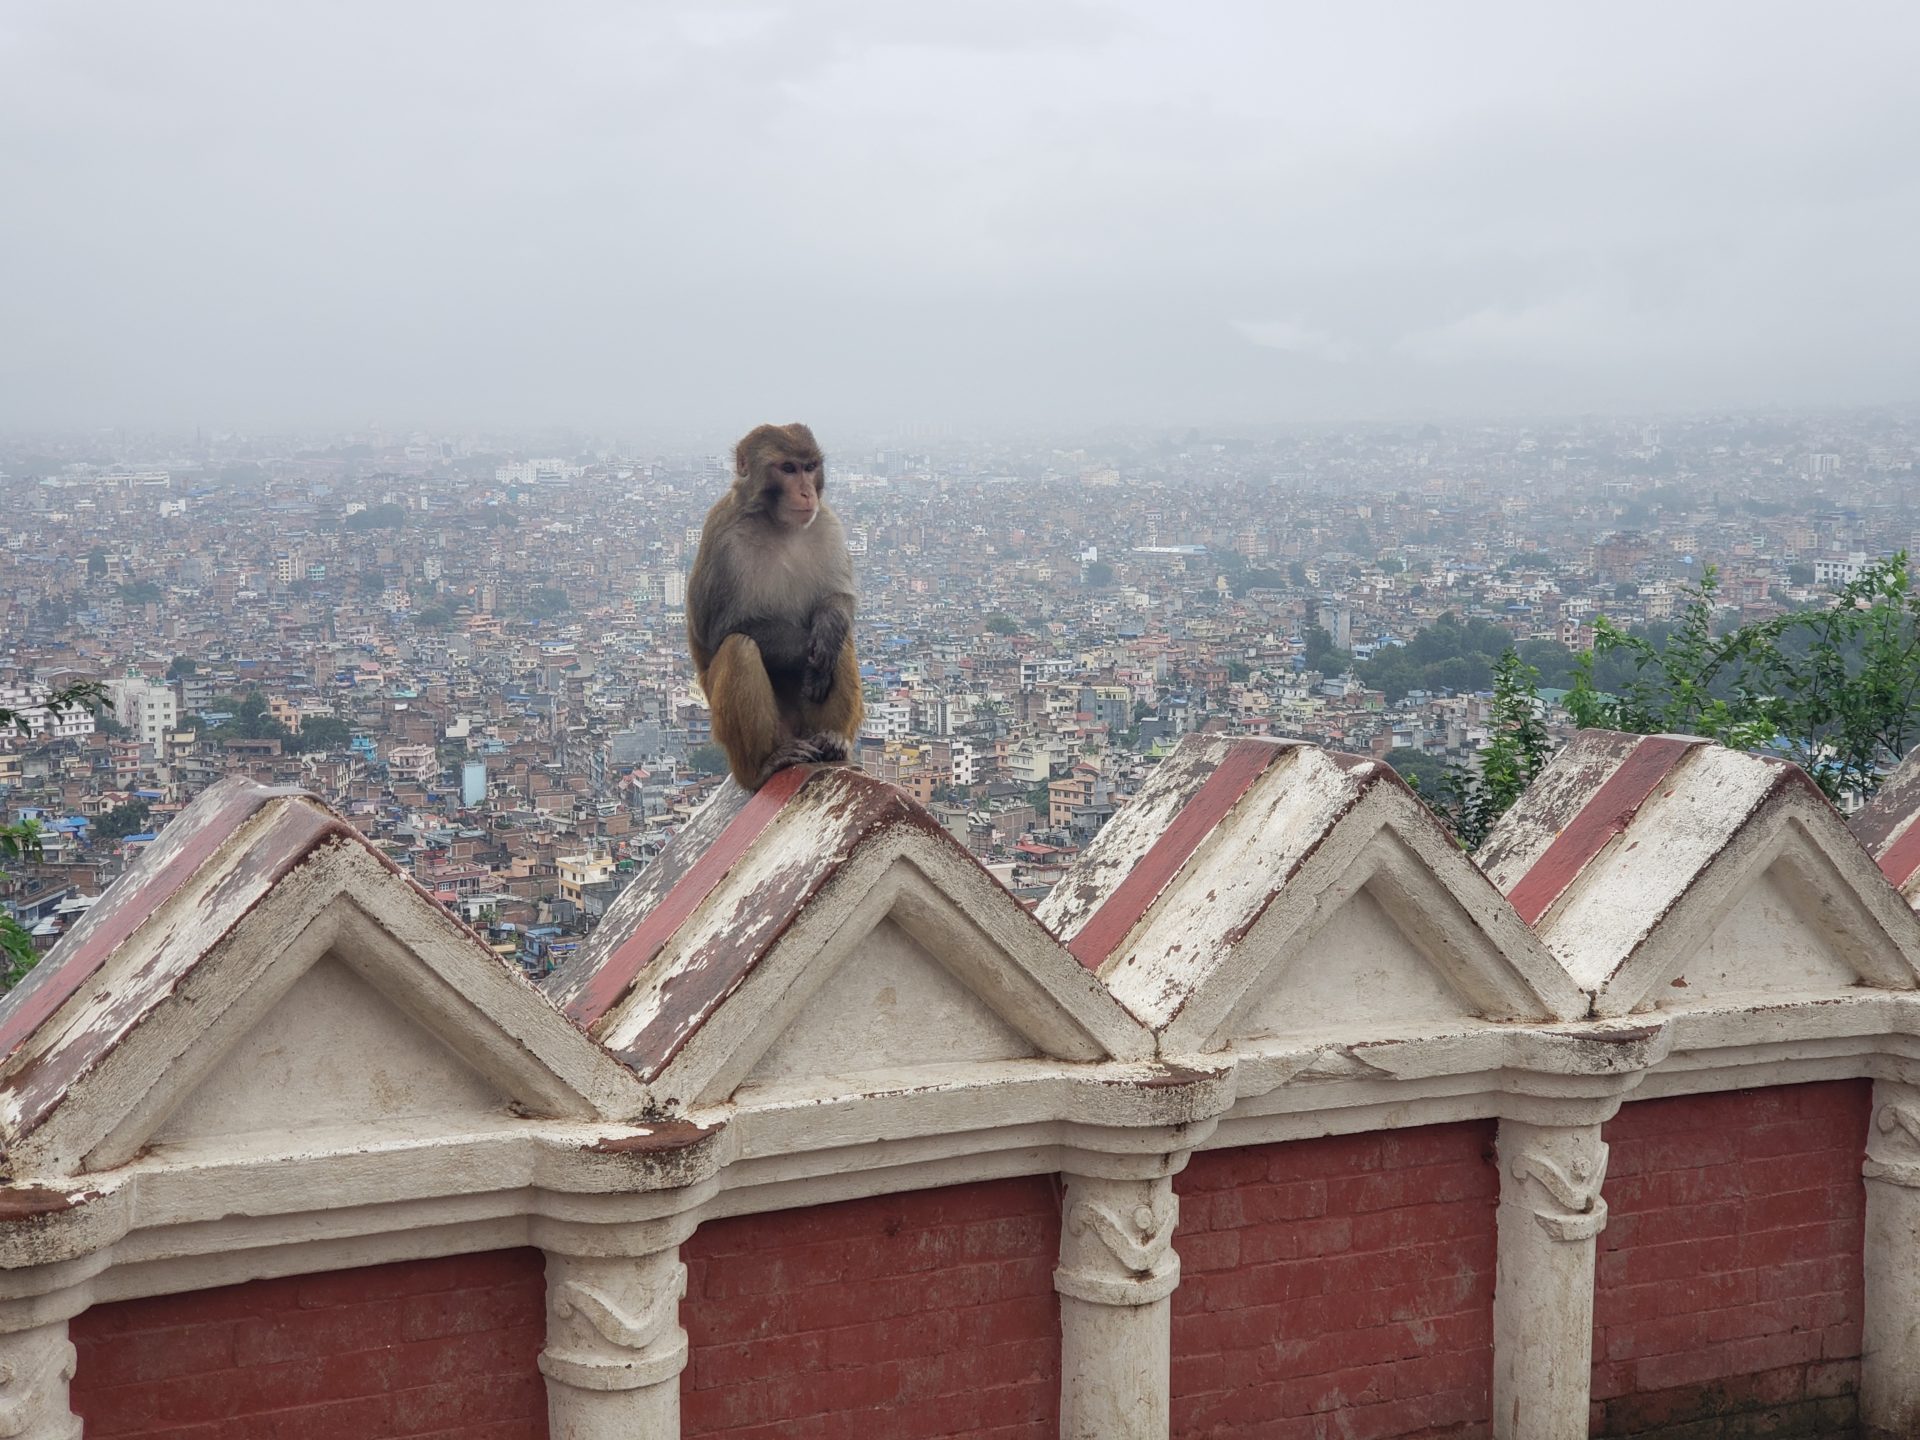 a monkey sitting on a wall with a city in the background